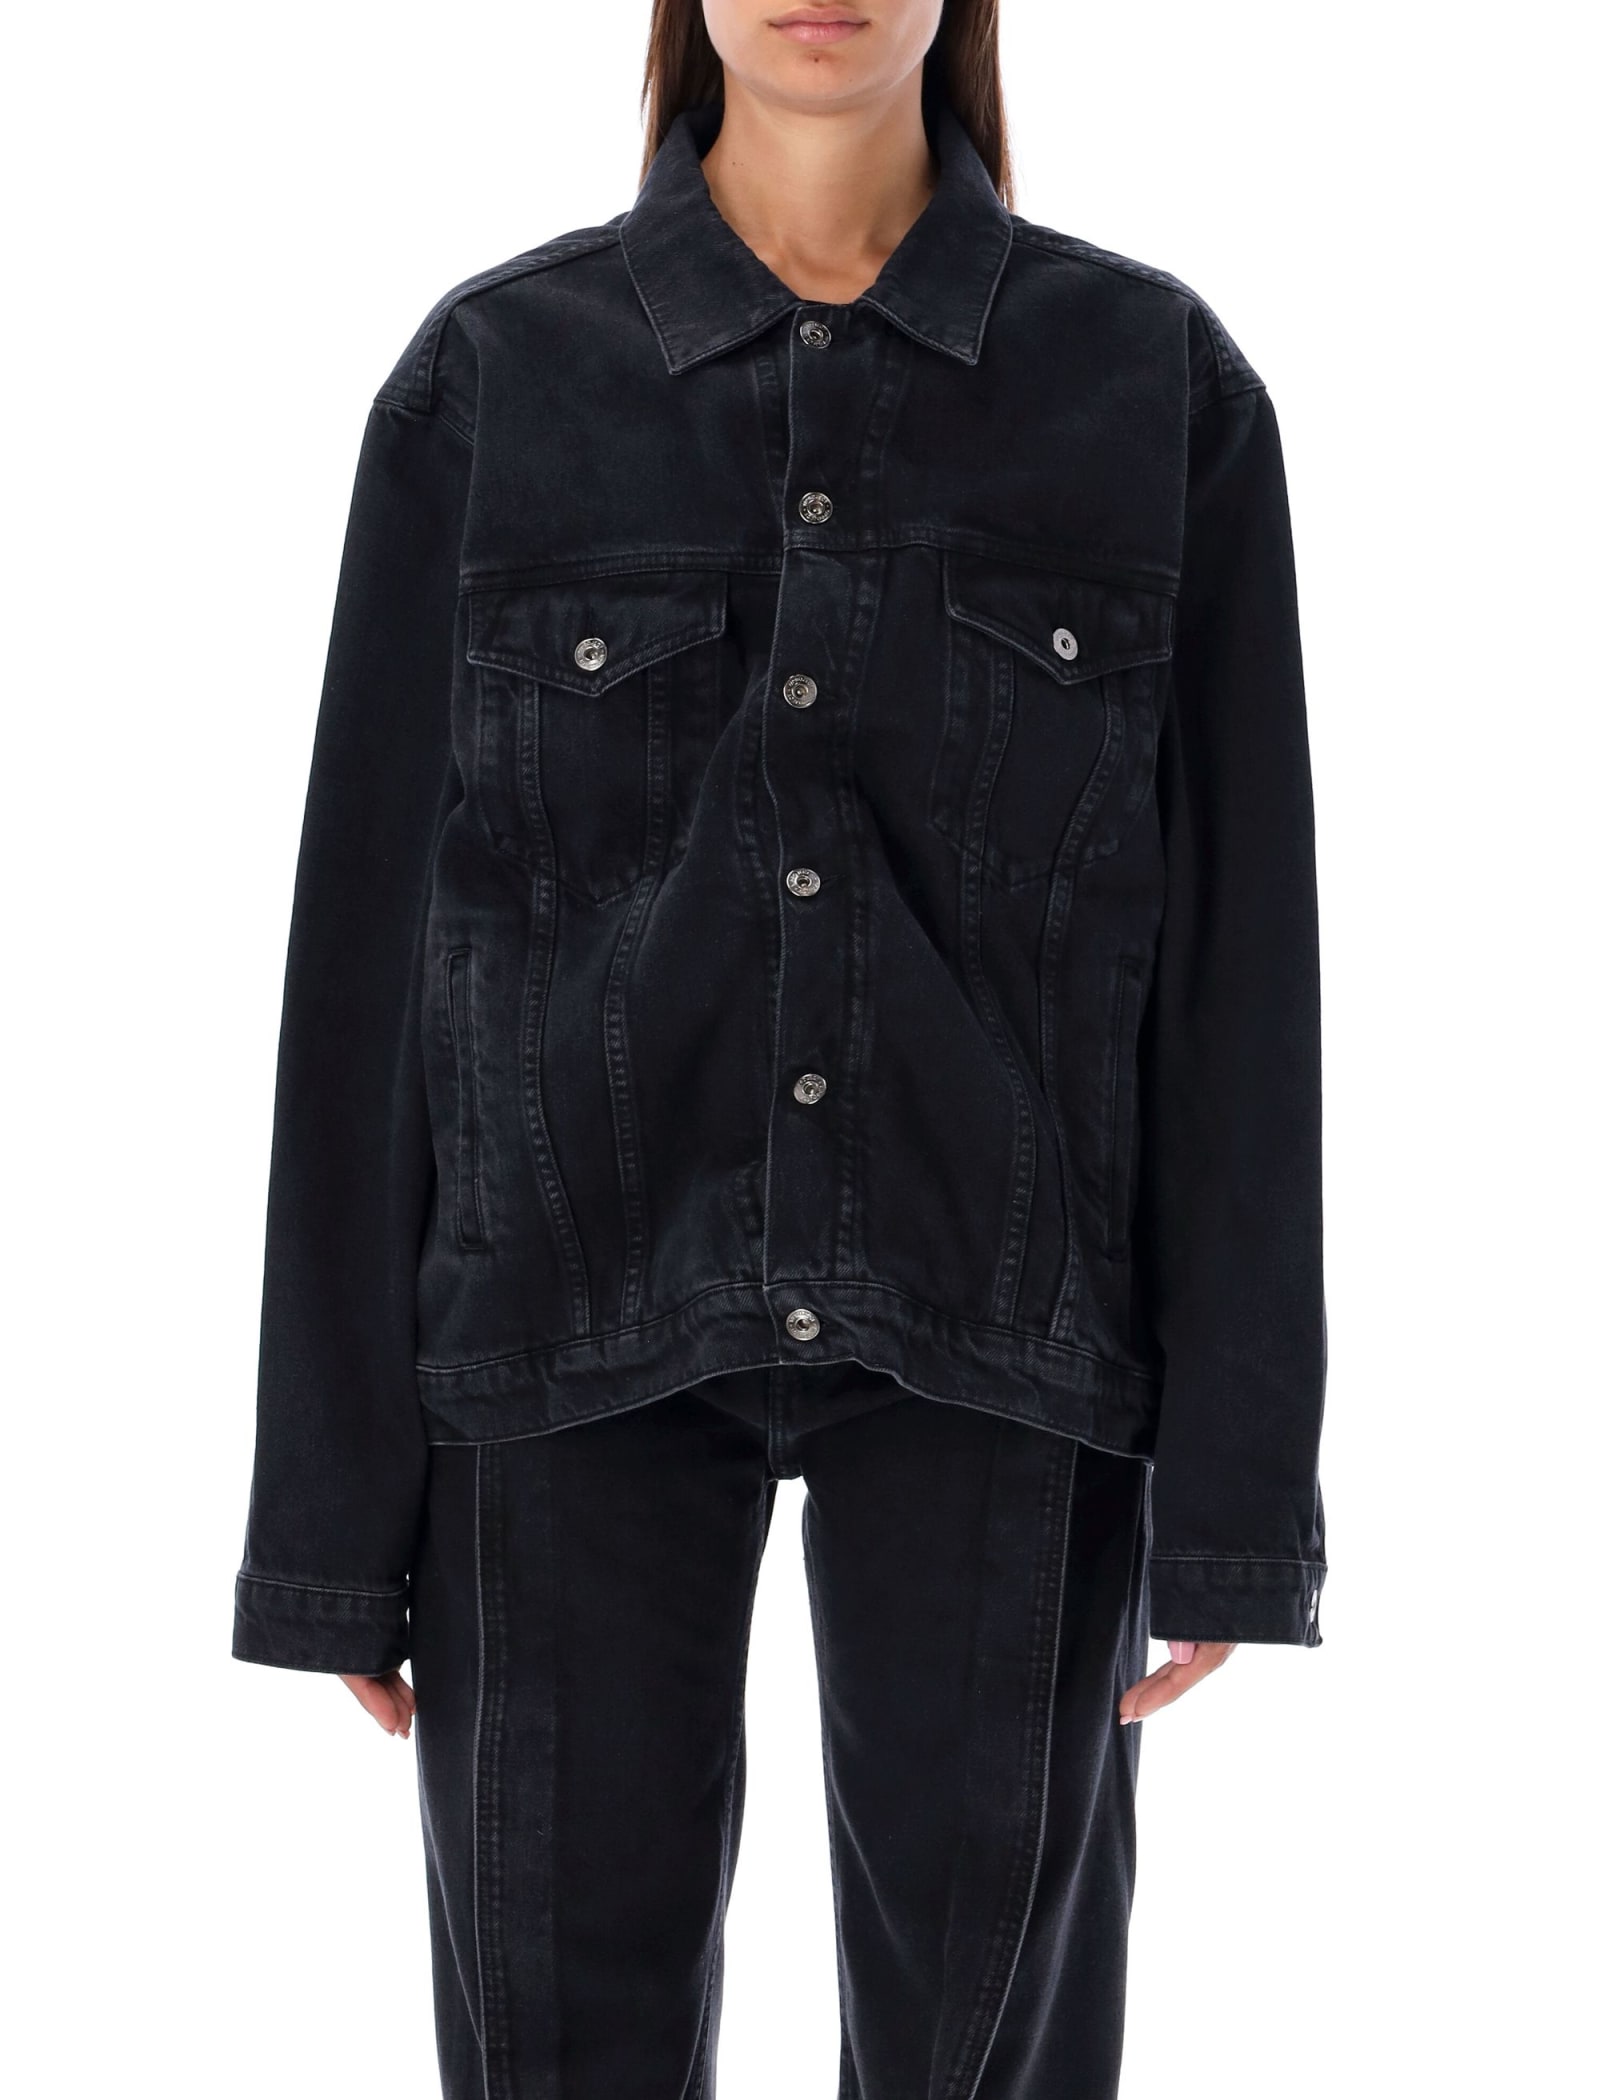 Y-Project launches a denim jacket with ridiculously long sleeves